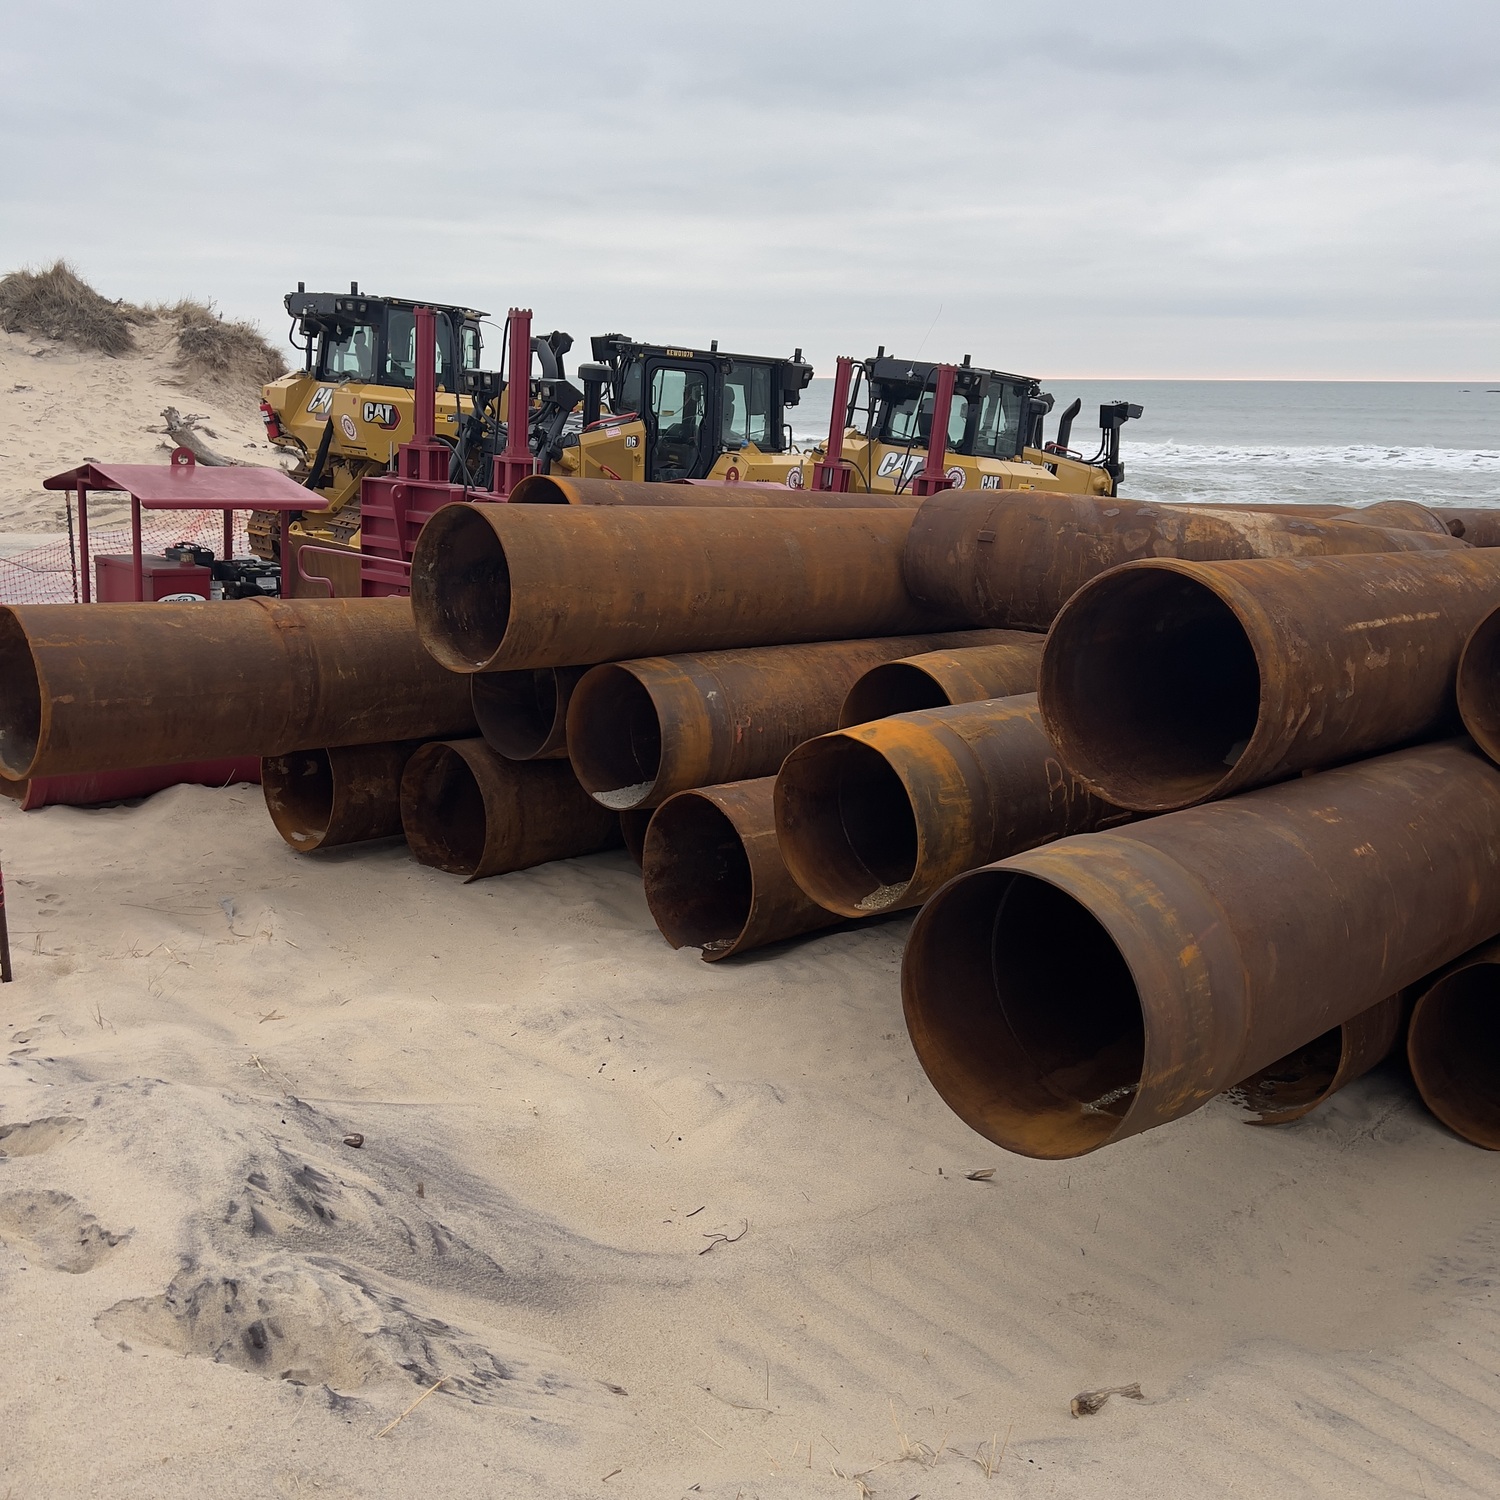 Contractors working for the Army Corps of Engineers staged bulldozers and piping on the beaches in Montauk last month so that the work can commence as soon as the dredge ship Ellis Island arrives -- which could be as soon as this coming week. DOUG KUNTZ